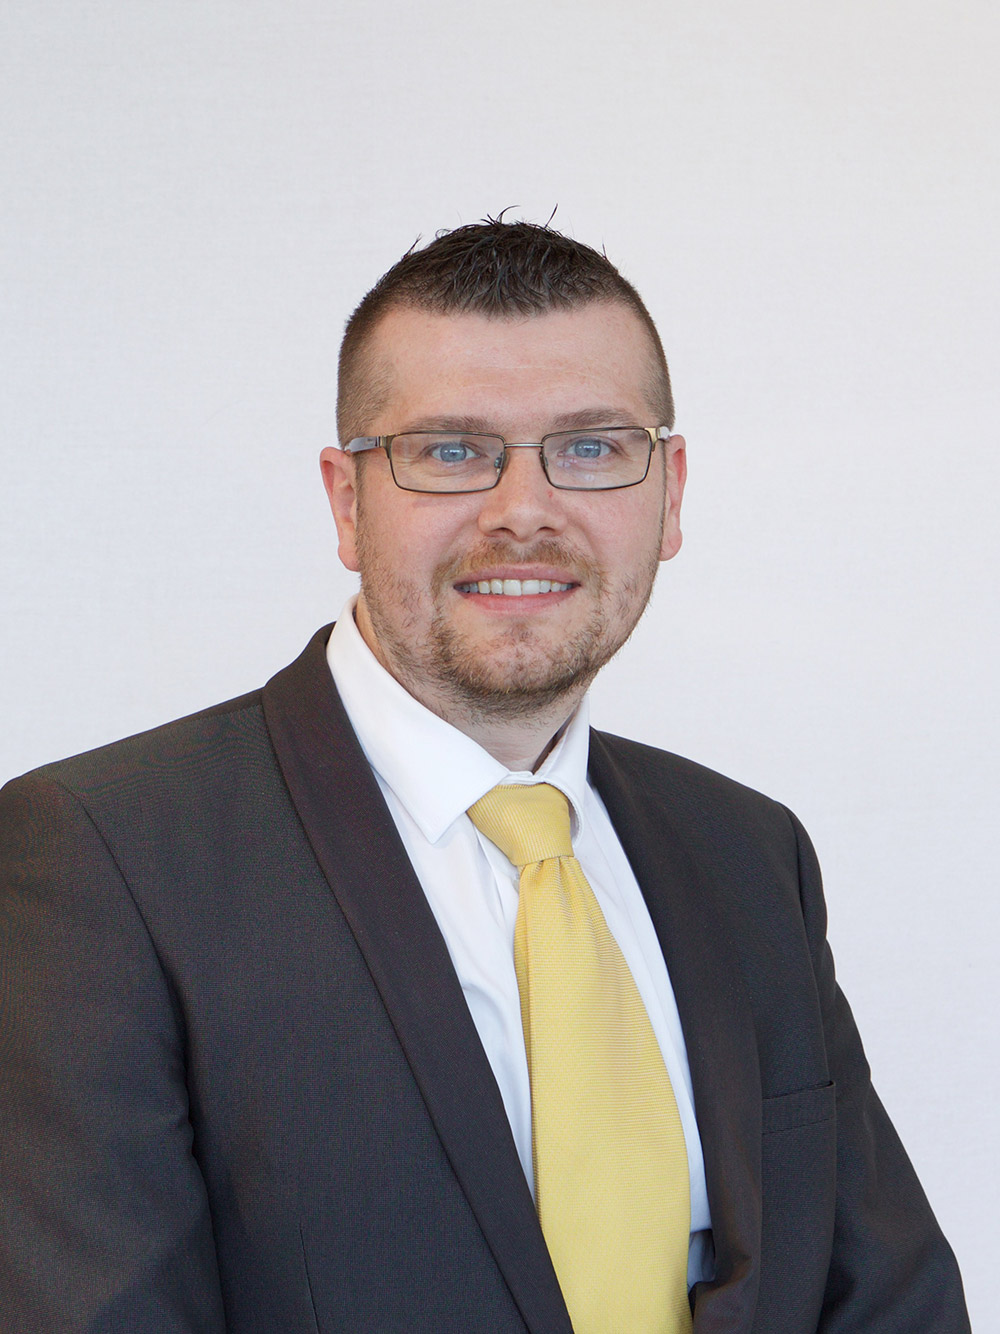 Chris Clewes - Service Manager - Toyota Hanley Service Centre